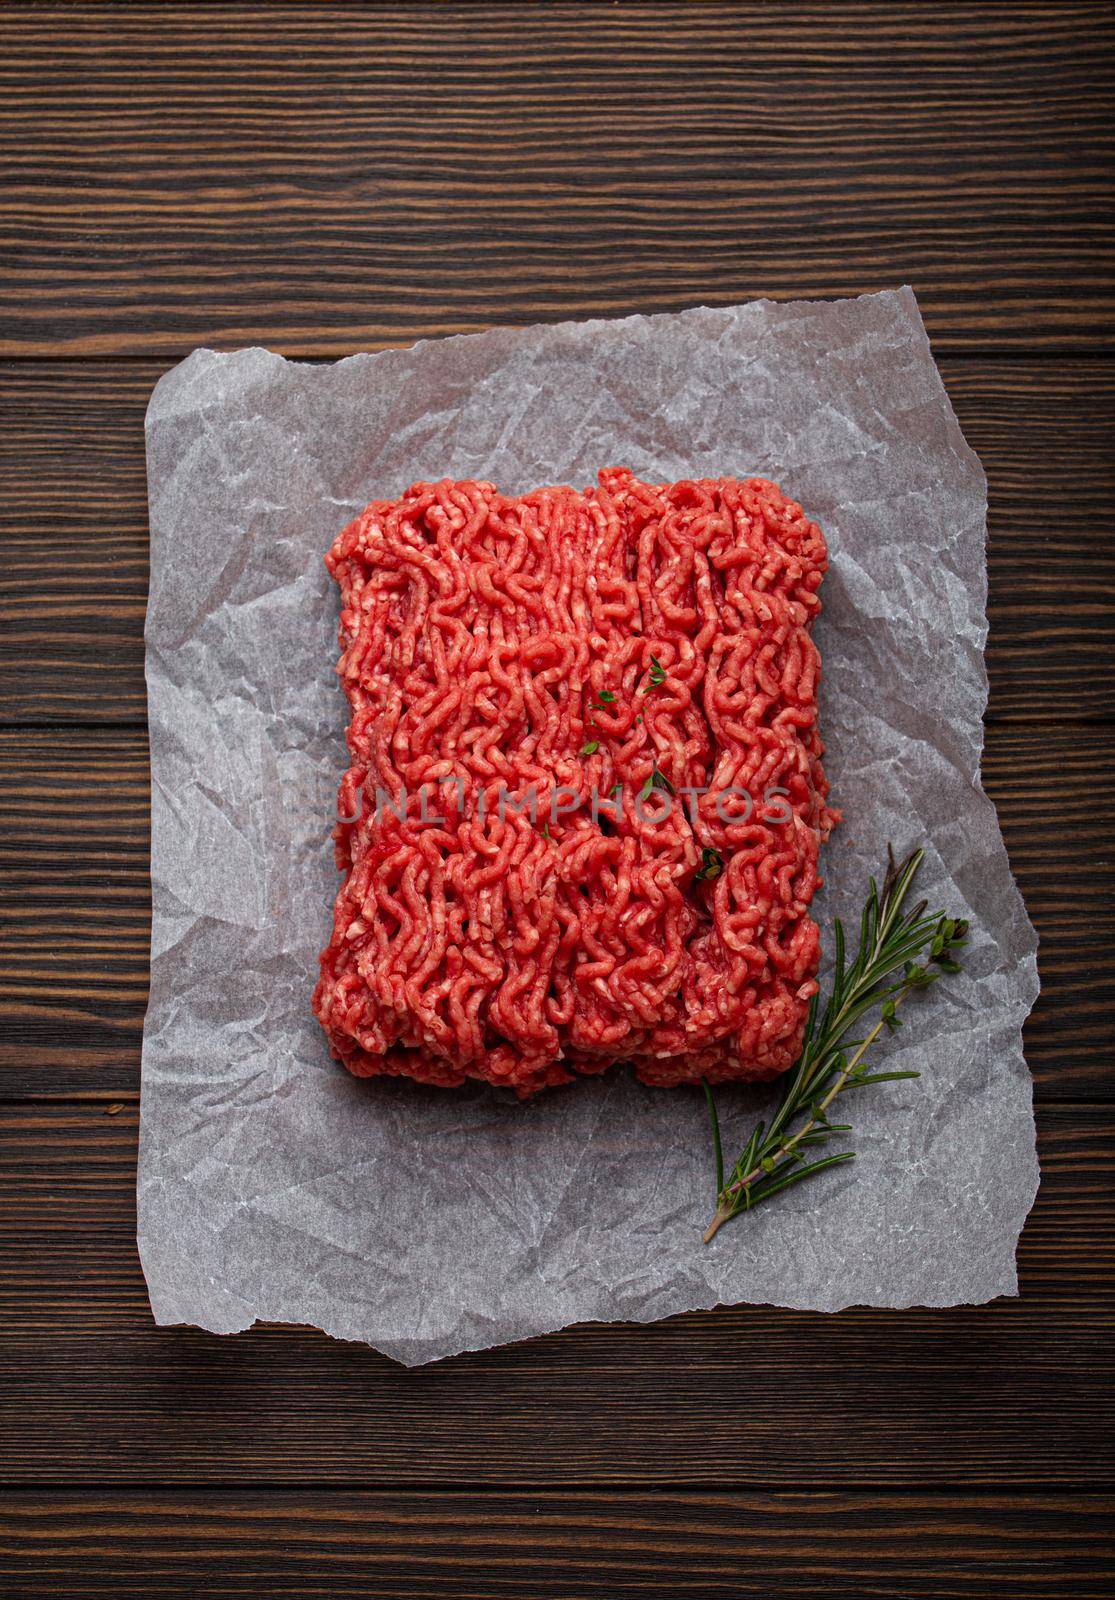 Fresh raw minced meat from ground beef or pork on cutting board and dark brown rustic wooden background from above for catalog or shop